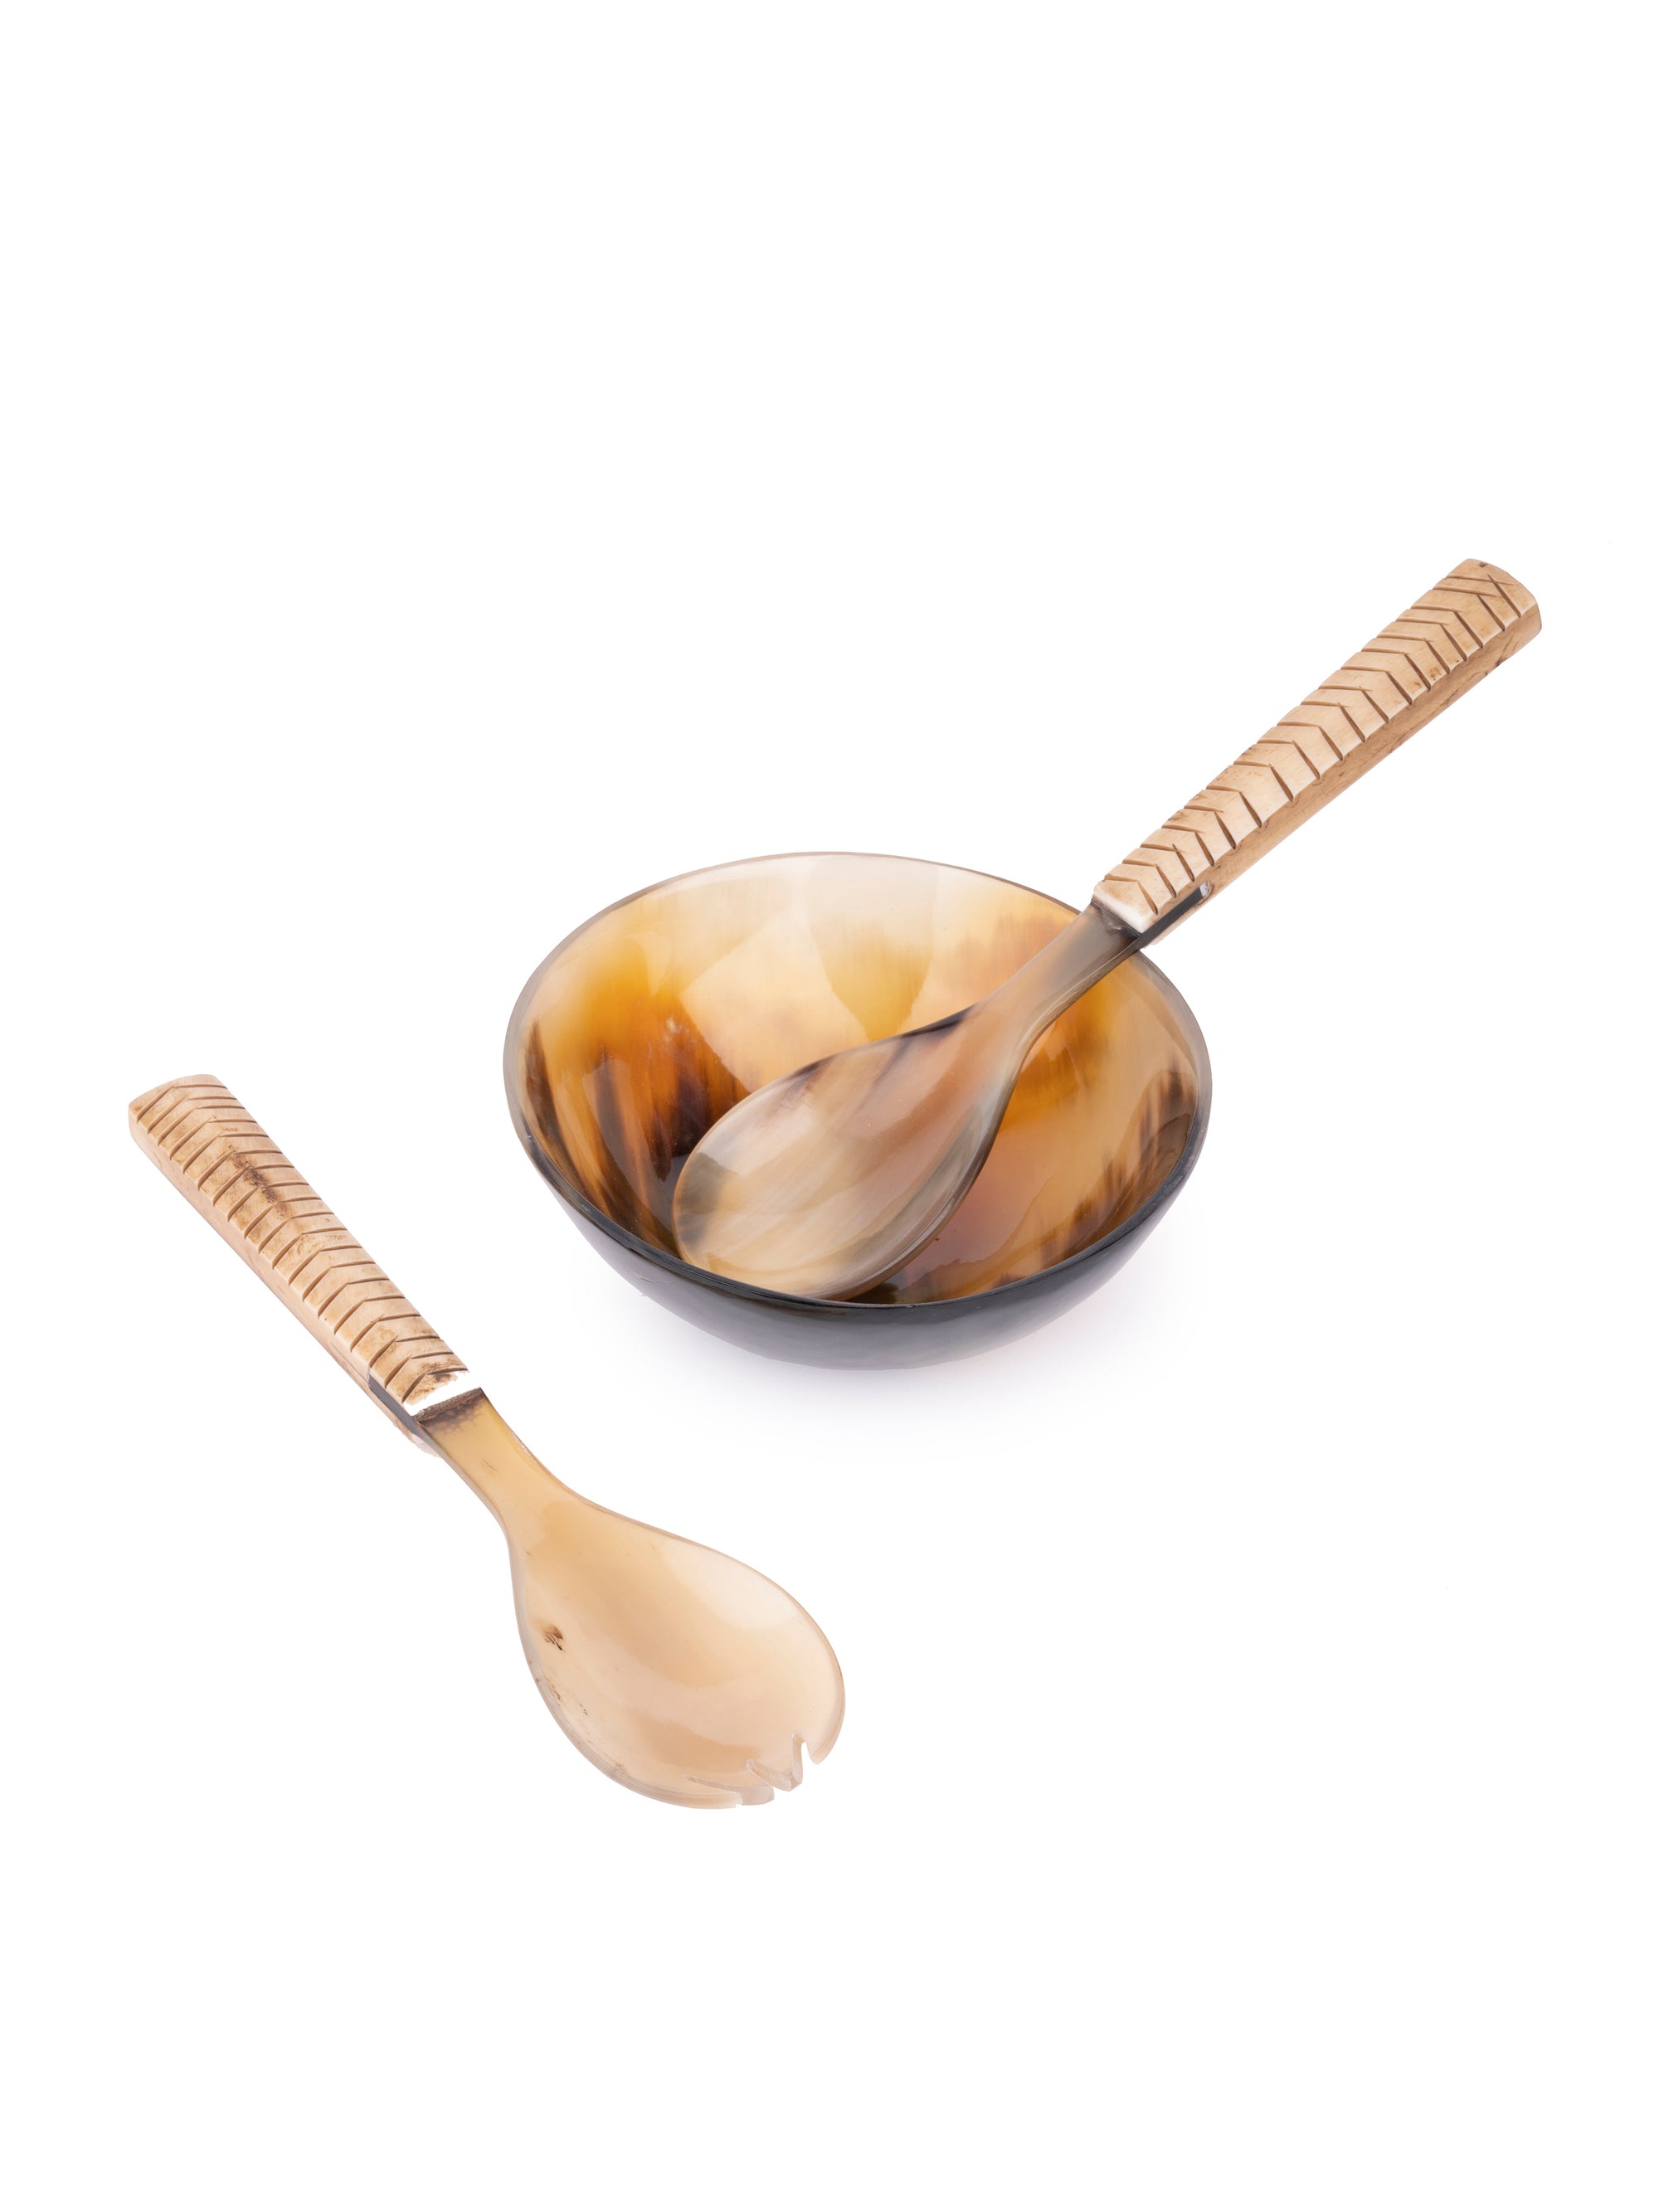 Natural Buffalo Horn 5 inches Serving bowl with Spoon and Fork set - The Heritage Artifacts